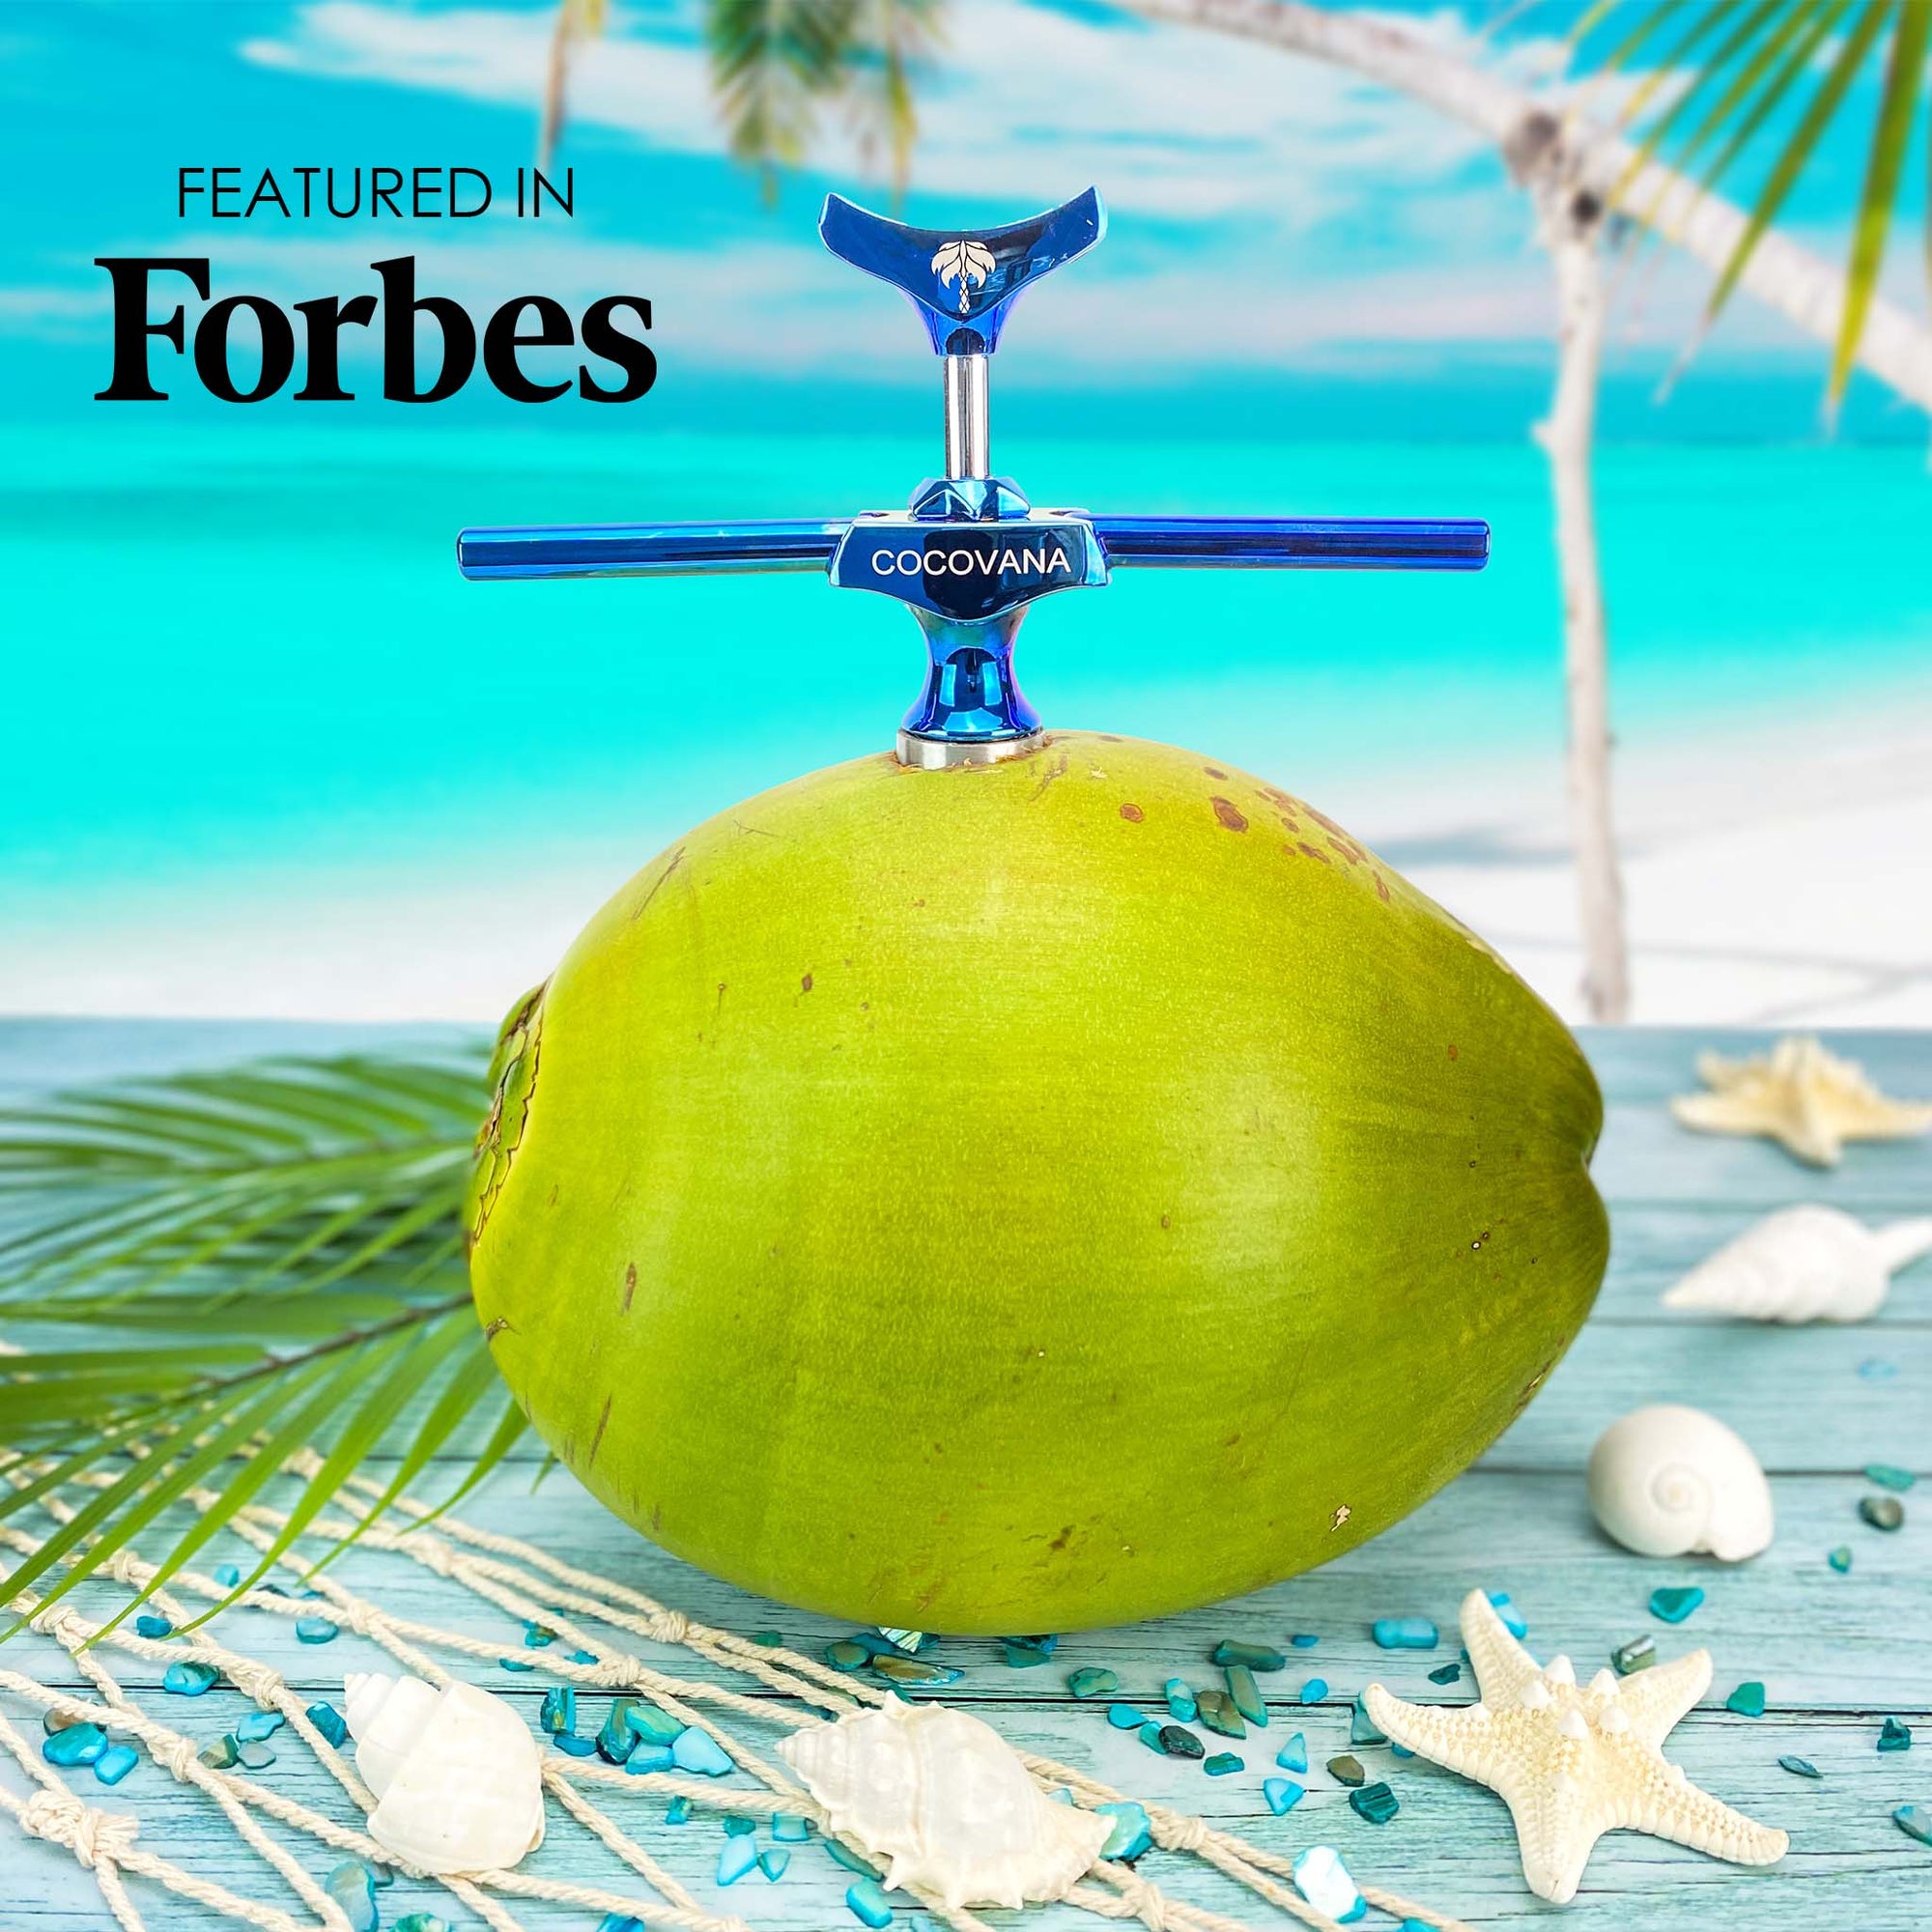 Cocovana Coconut Twist Green Beach Tropical Tree Forbes Magazine Ocean Sand Branches Tool Opener Blue Turquoise Steel Metal Stainless Blade Hole Saw Premium